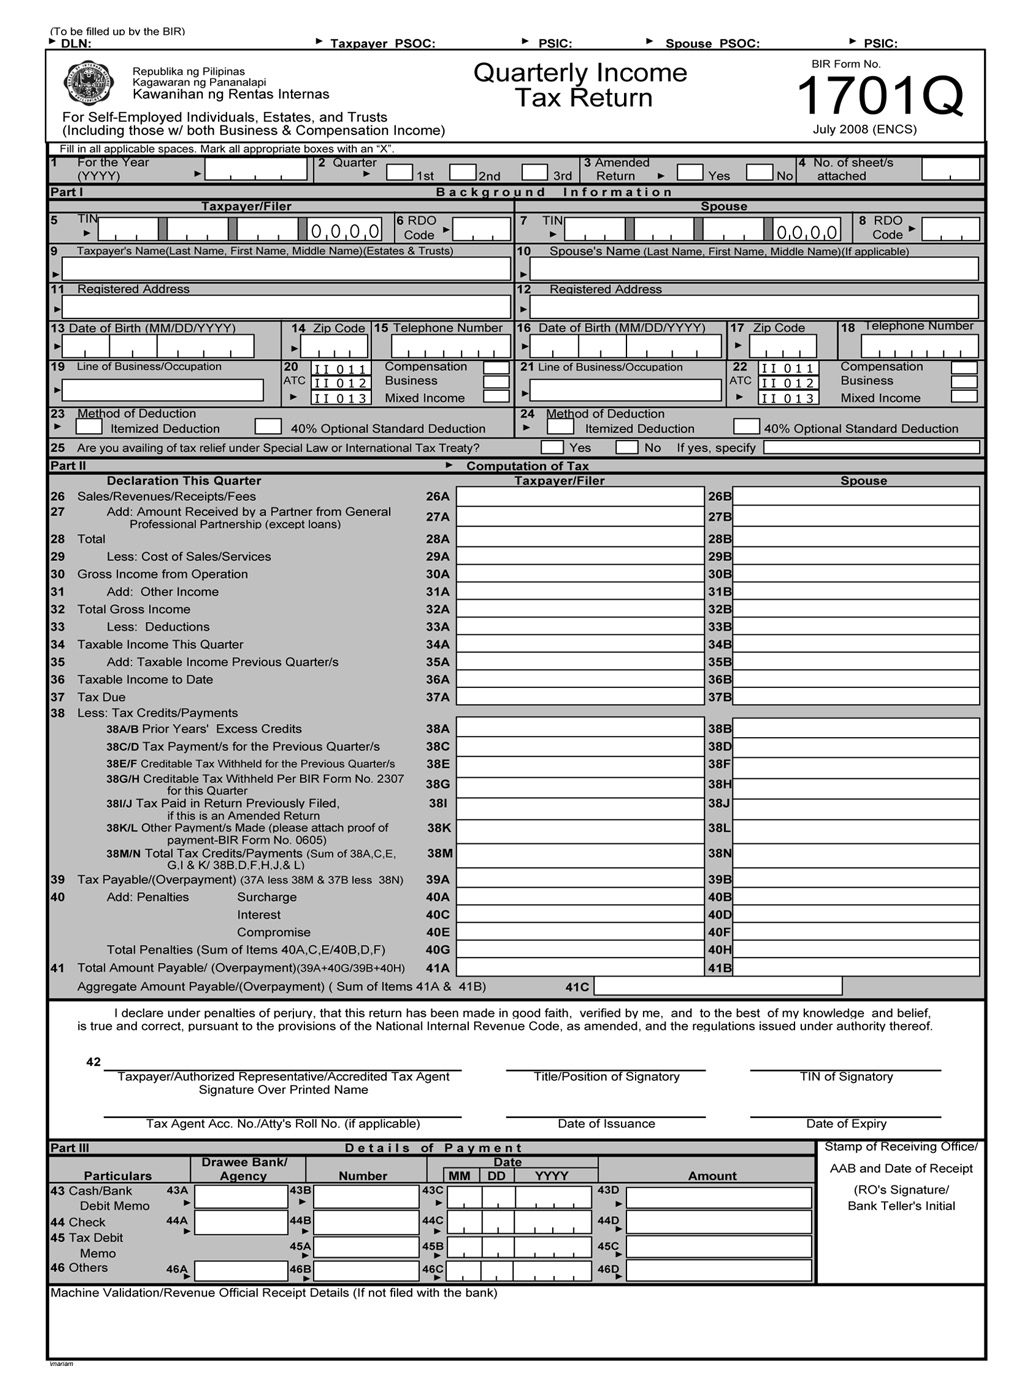 income-tax-form-instructions